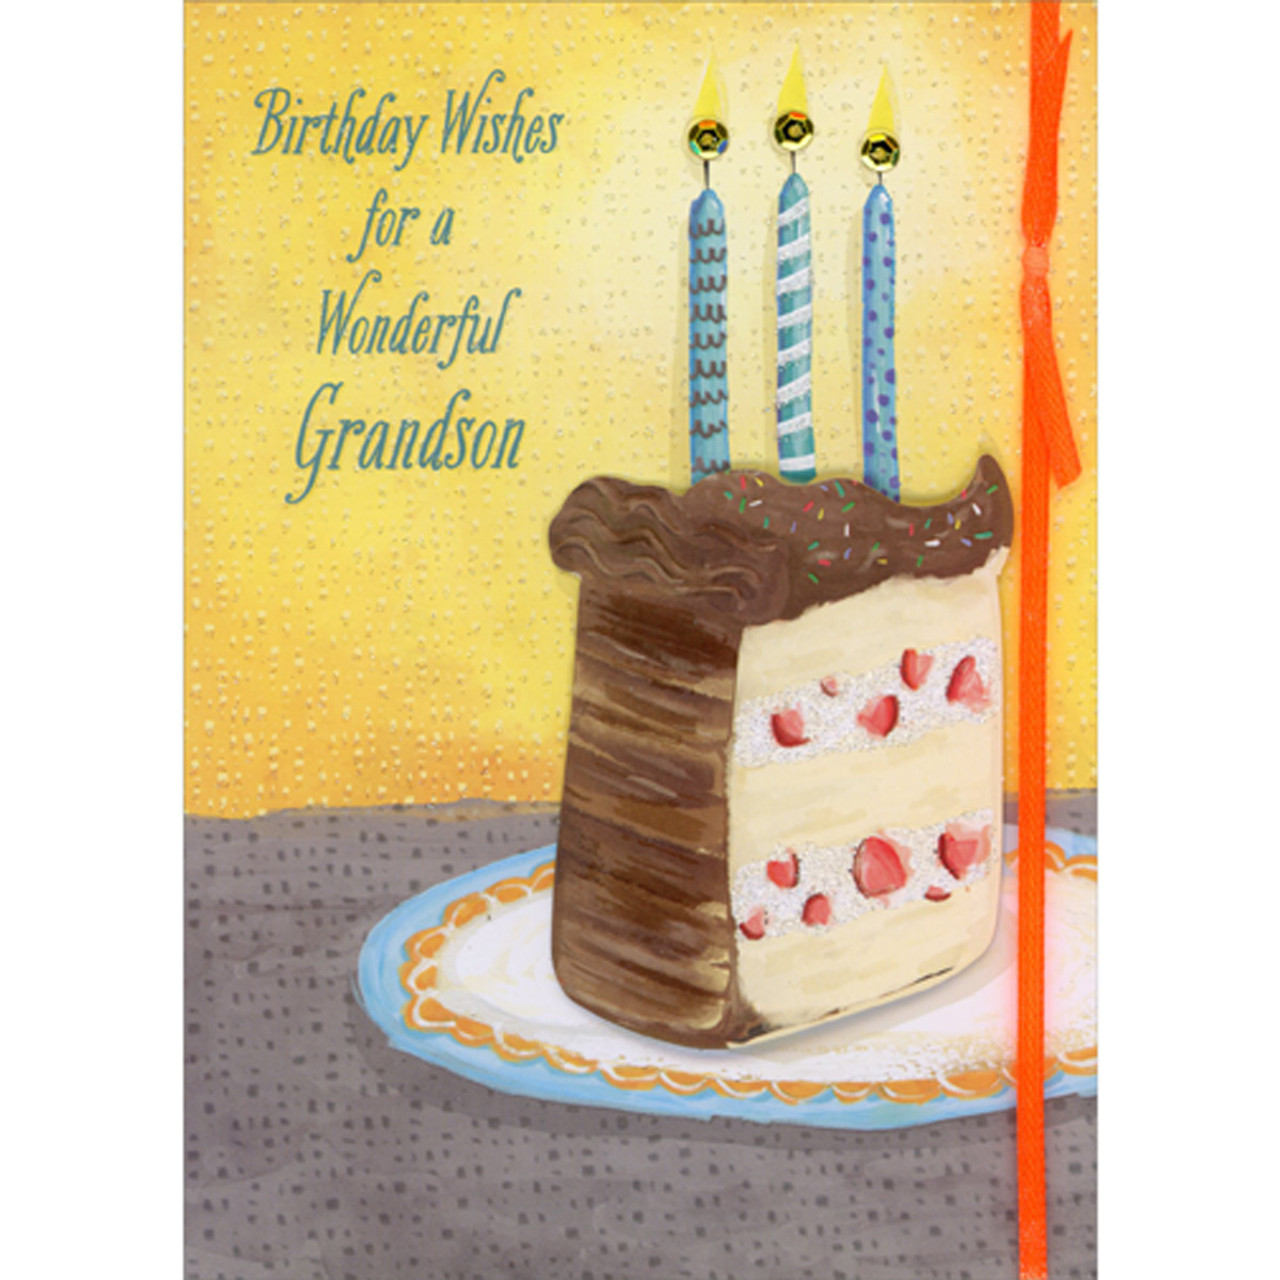 Doodlecards Great Grandson Birthday Card - Dog Party Hat Cake and Candles |  eBay